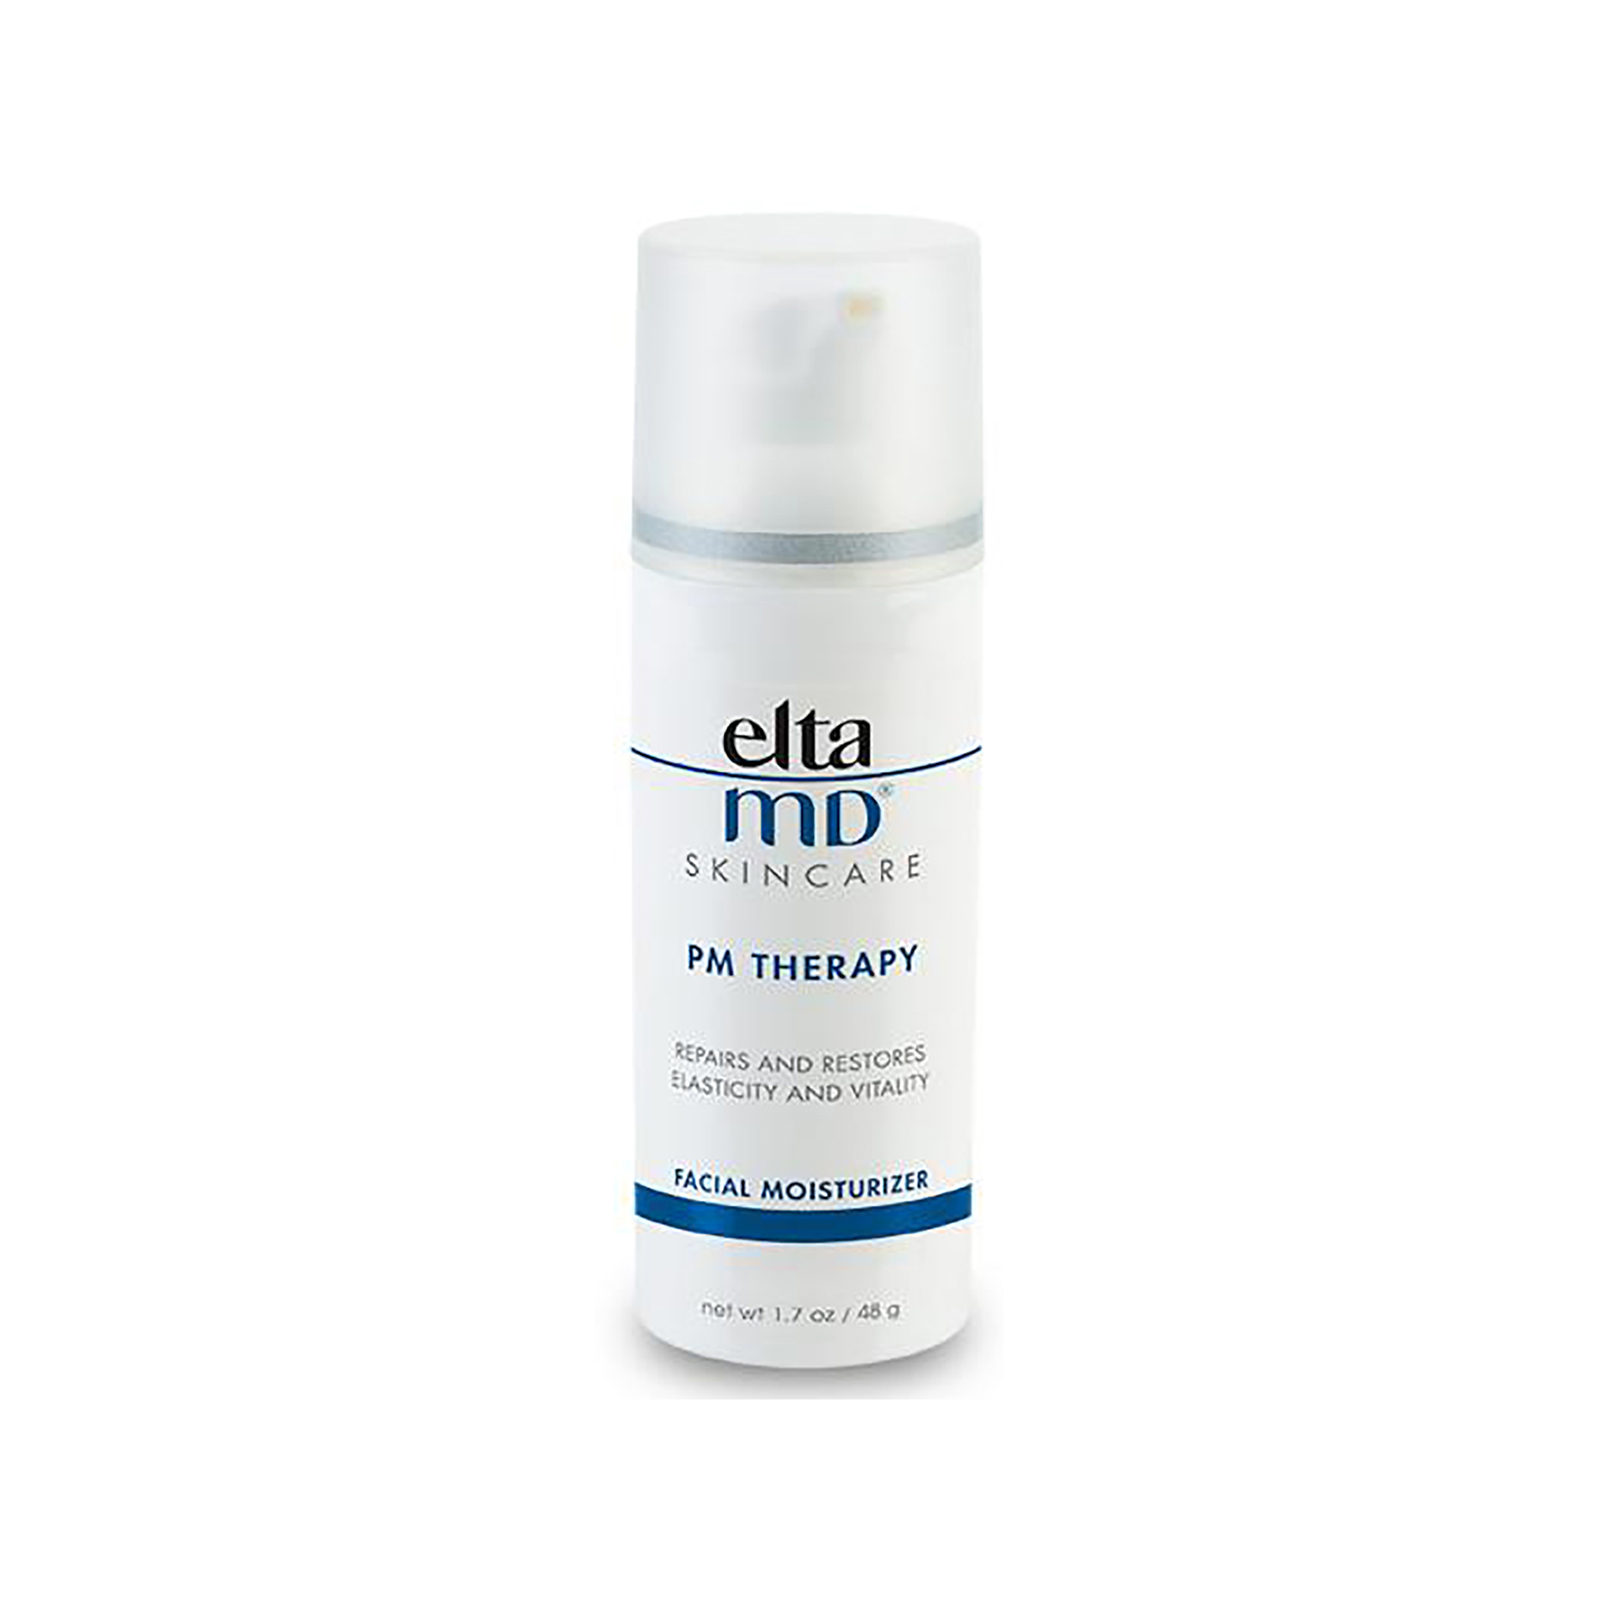 EltaMD PM THERAPY